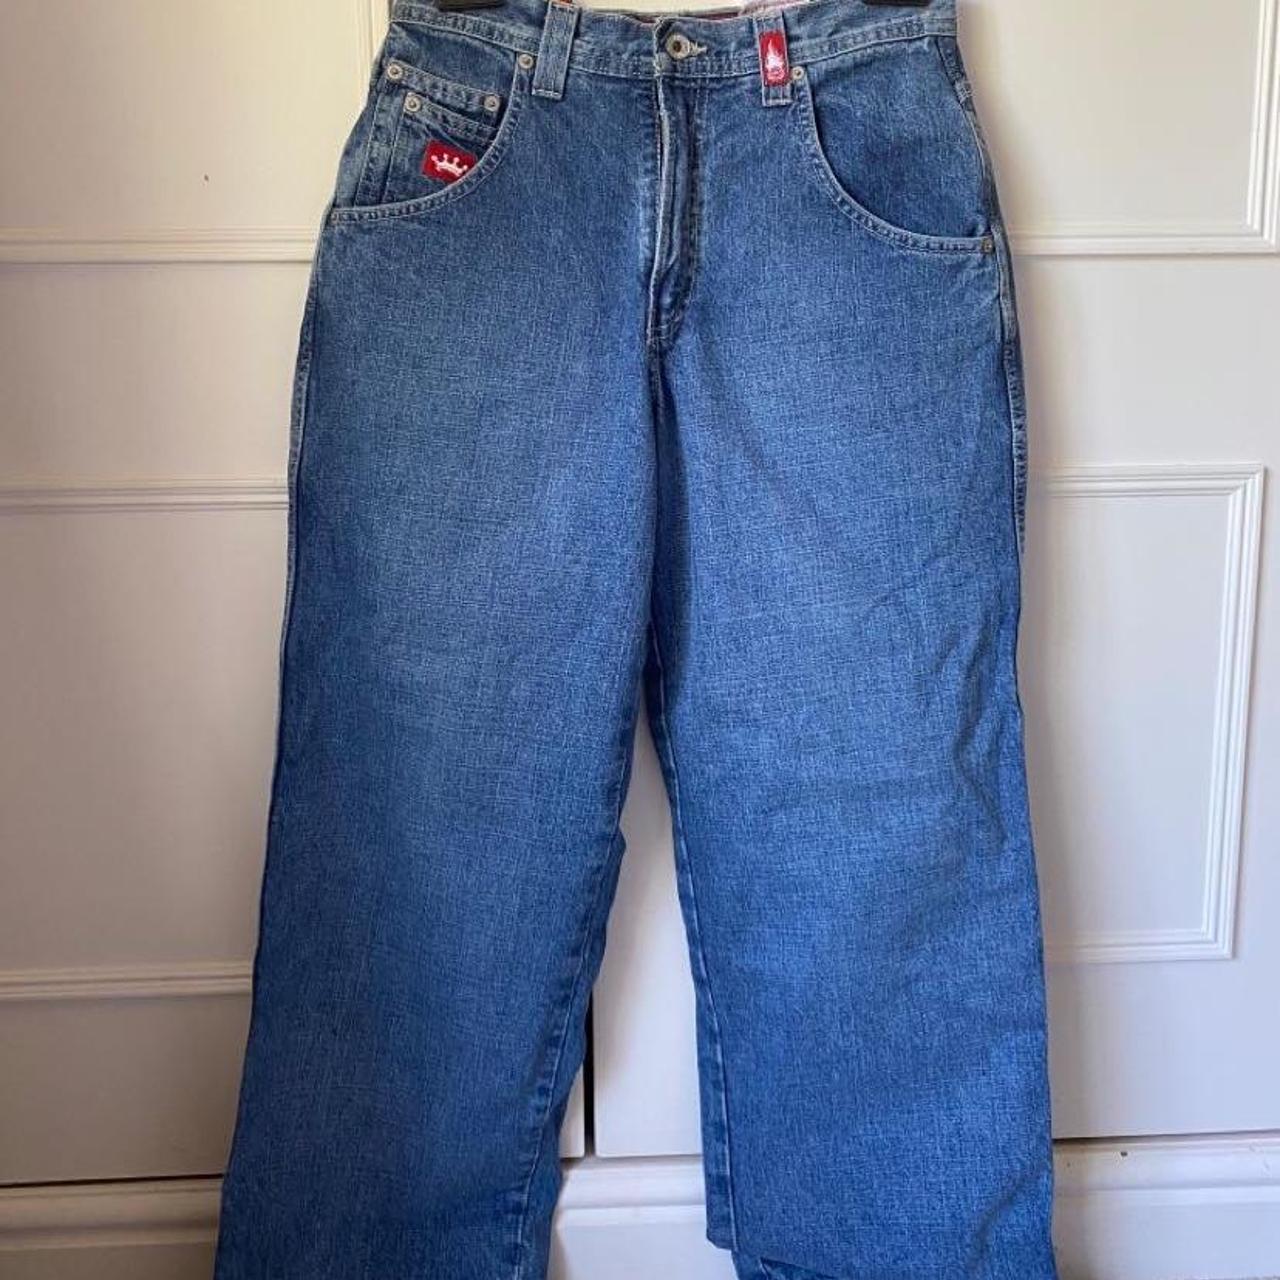 Brand new ultra rare baggy JNCO jeans with tags 30L... - Depop